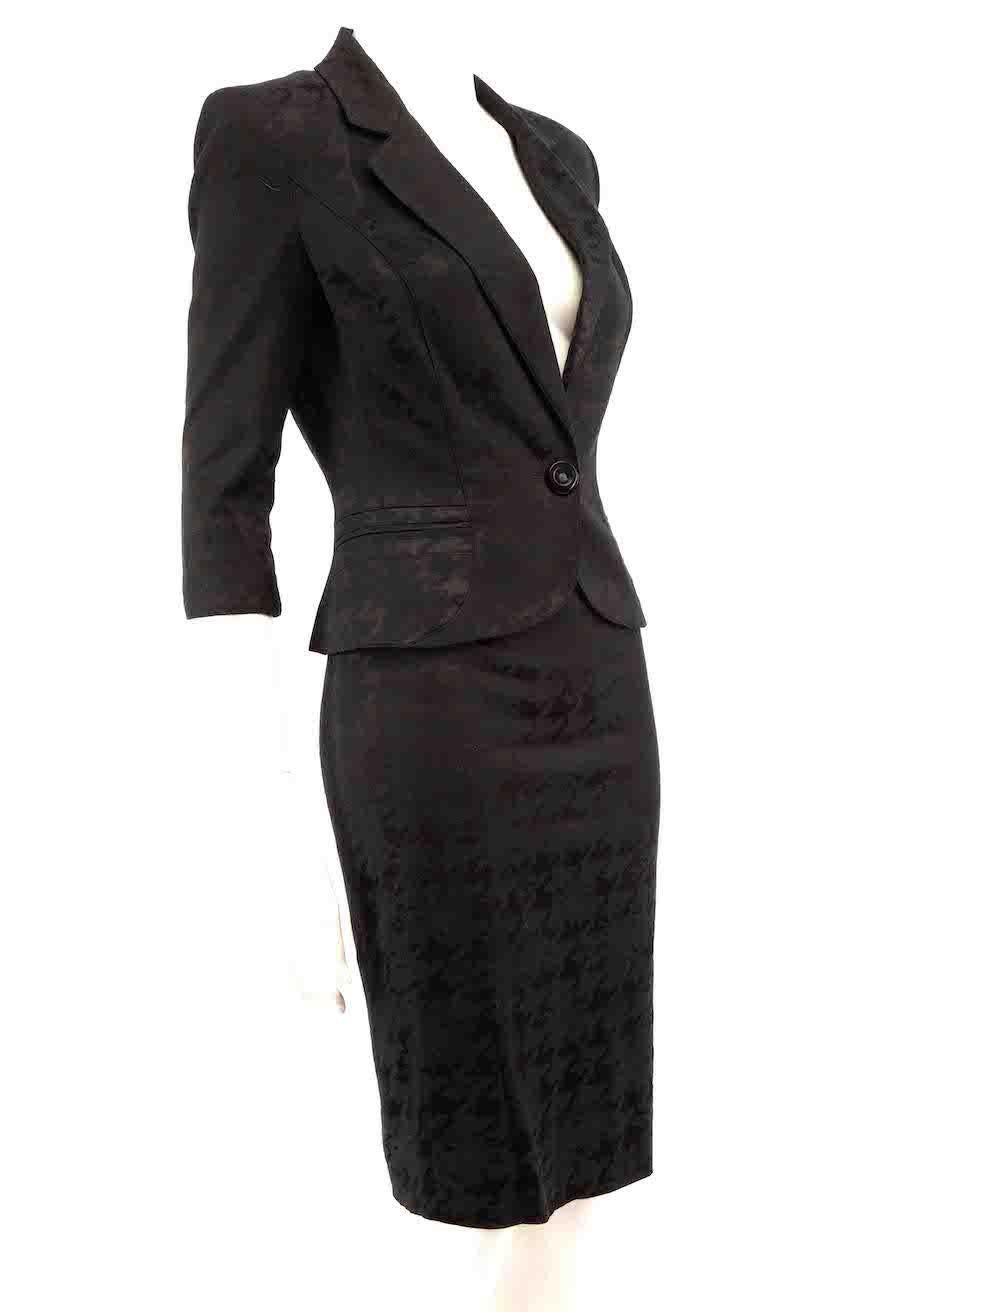 CONDITION is Very good. Hardly any visible wear to suit set is evident on this used Just Cavalli designer resale item.
 
 
 
 Details
 
 
 Black
 
 Synthetic
 
 Blazer skirt suit set
 
 Houndstooth pattern
 
 Single breasted blazer
 
 Mid length